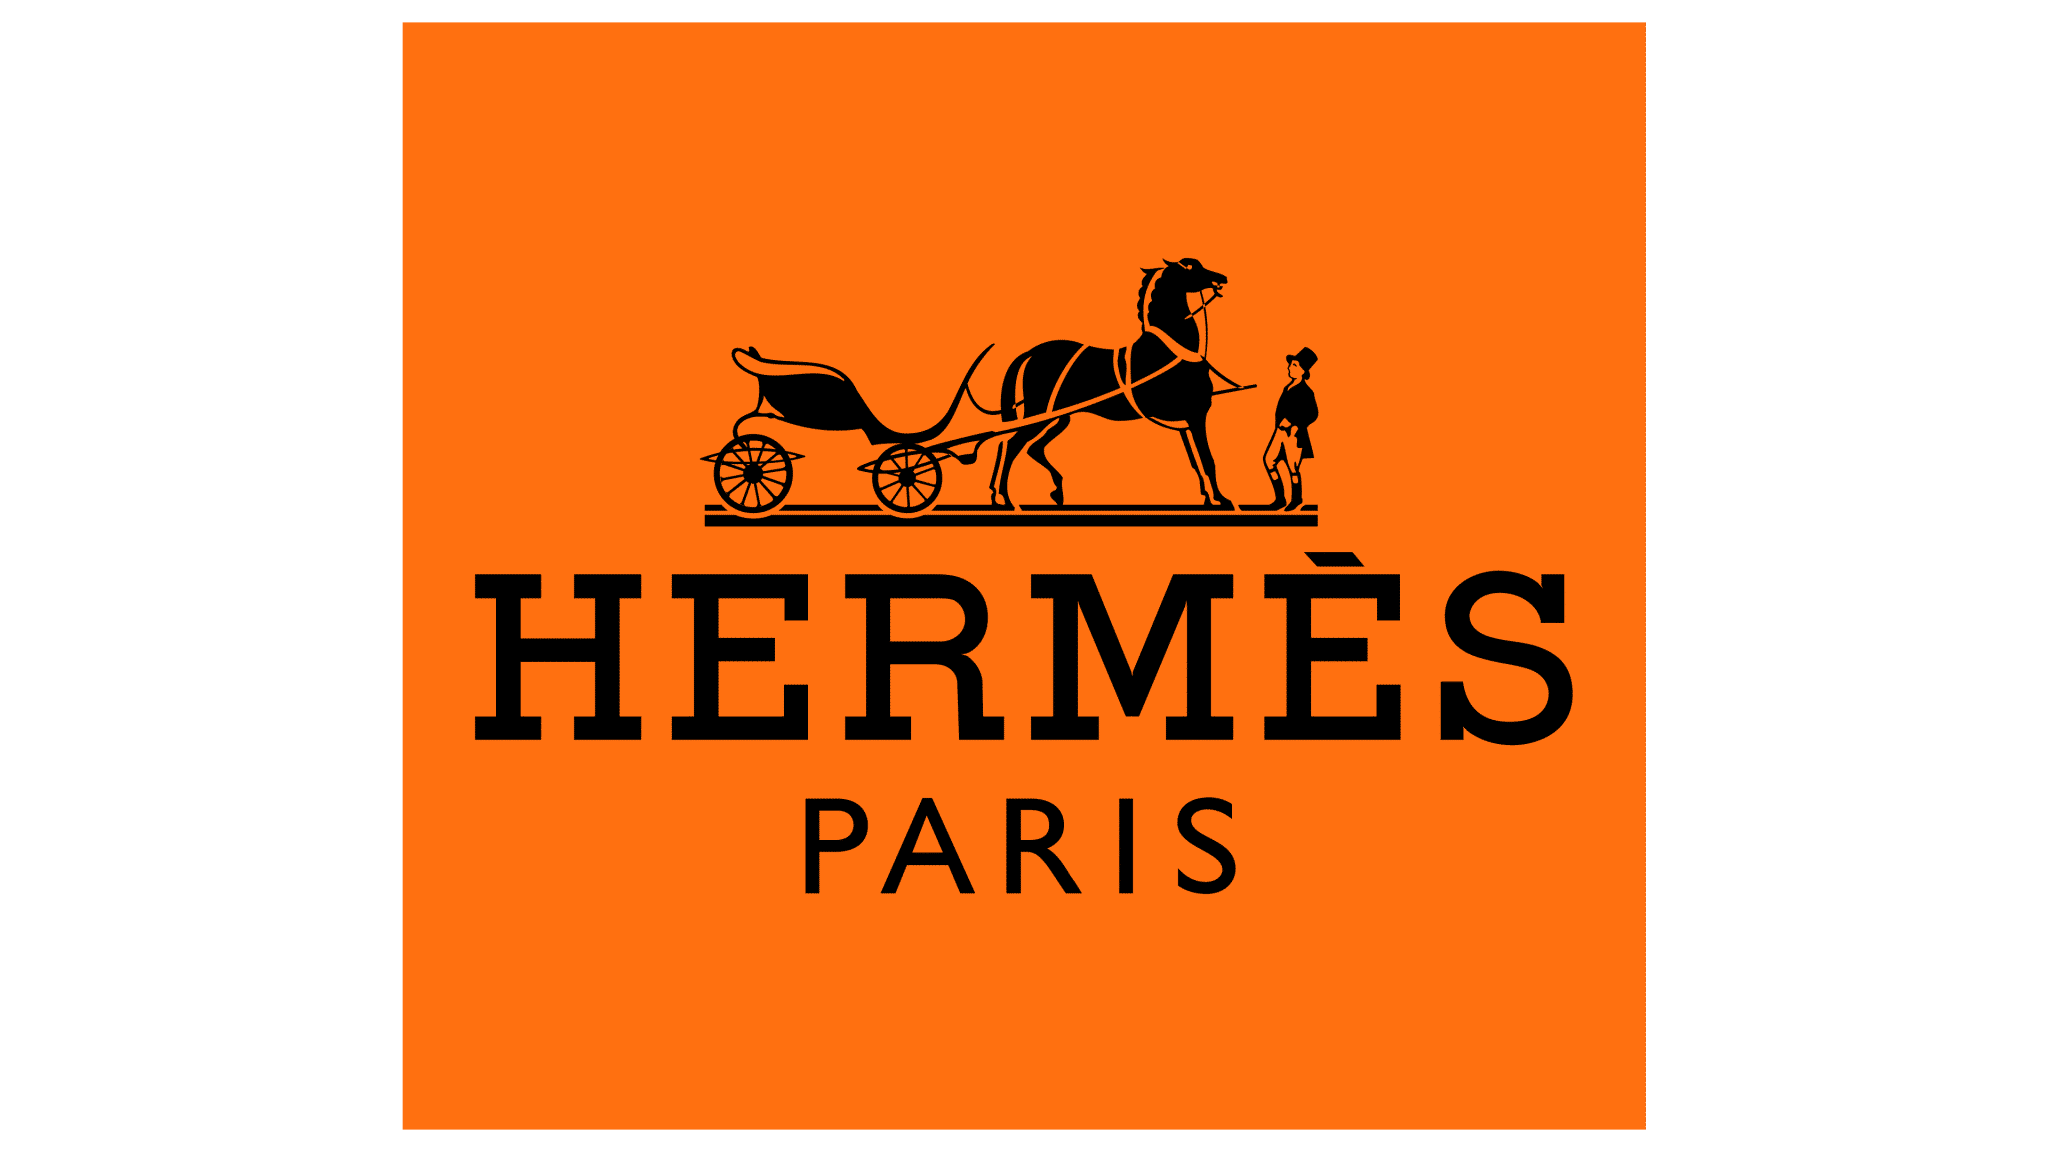 History of Hermès: the brand that is synonymous with luxury and exclusivity